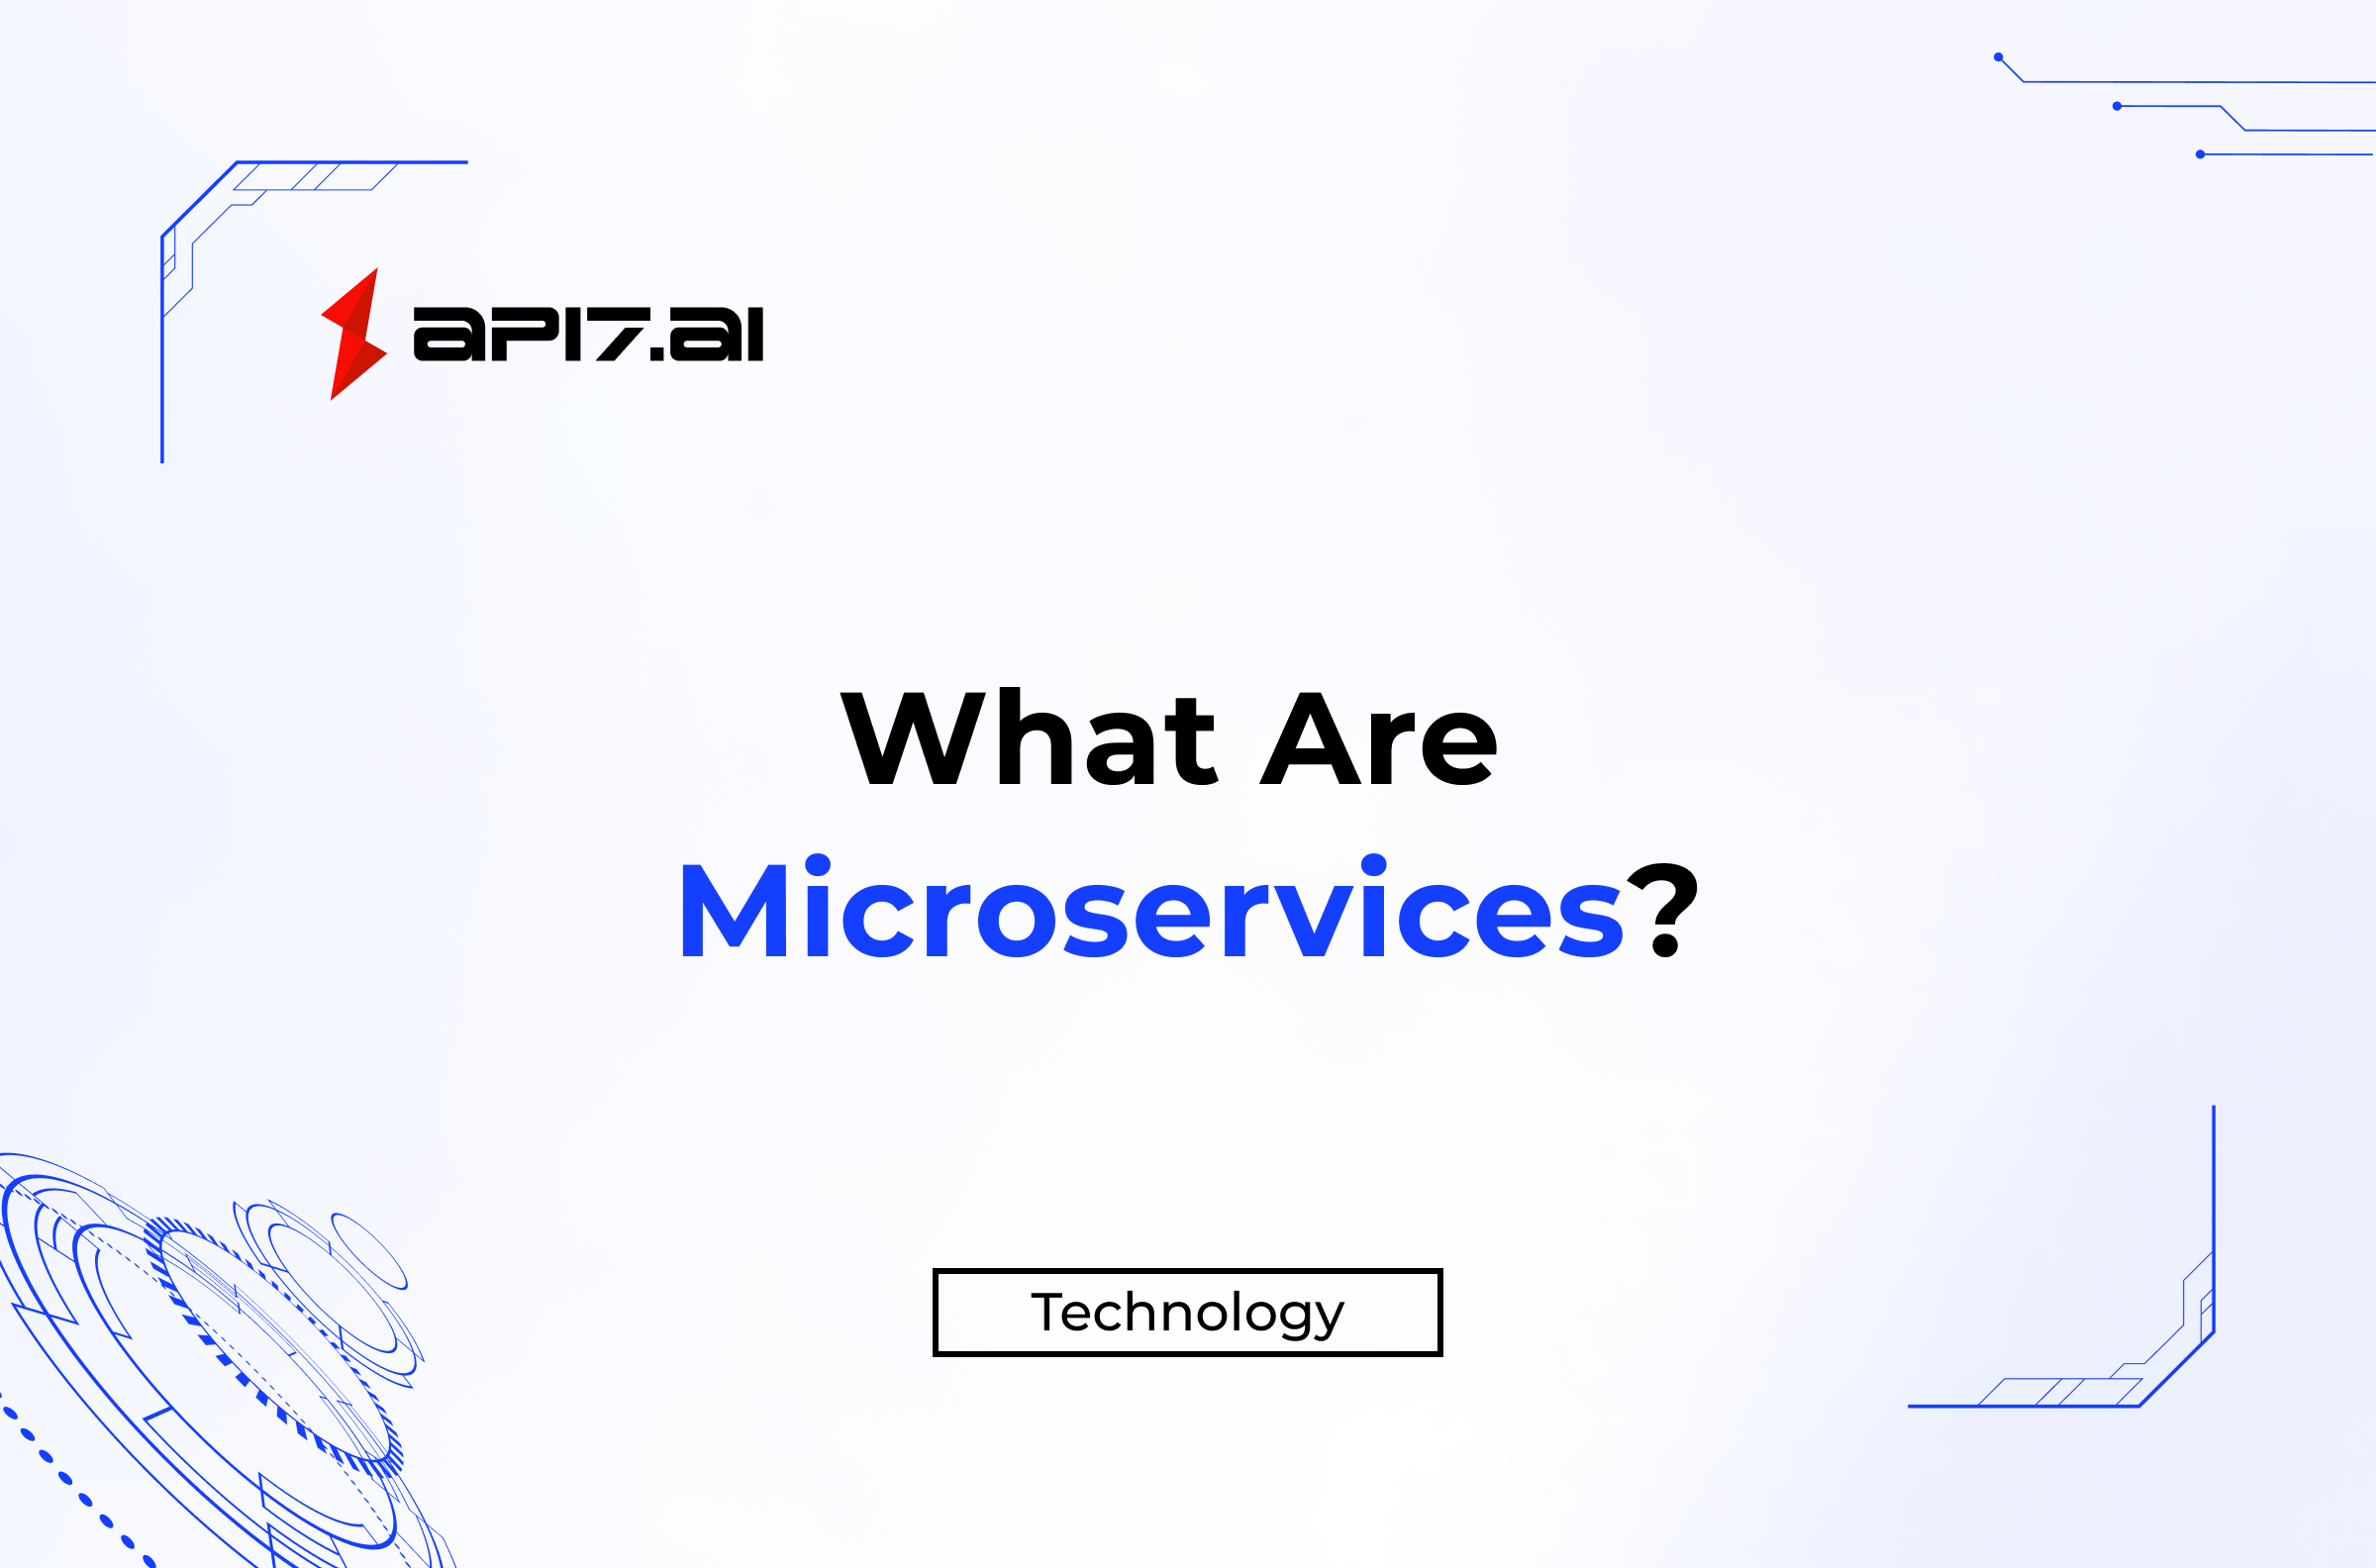 What Are Microservices?